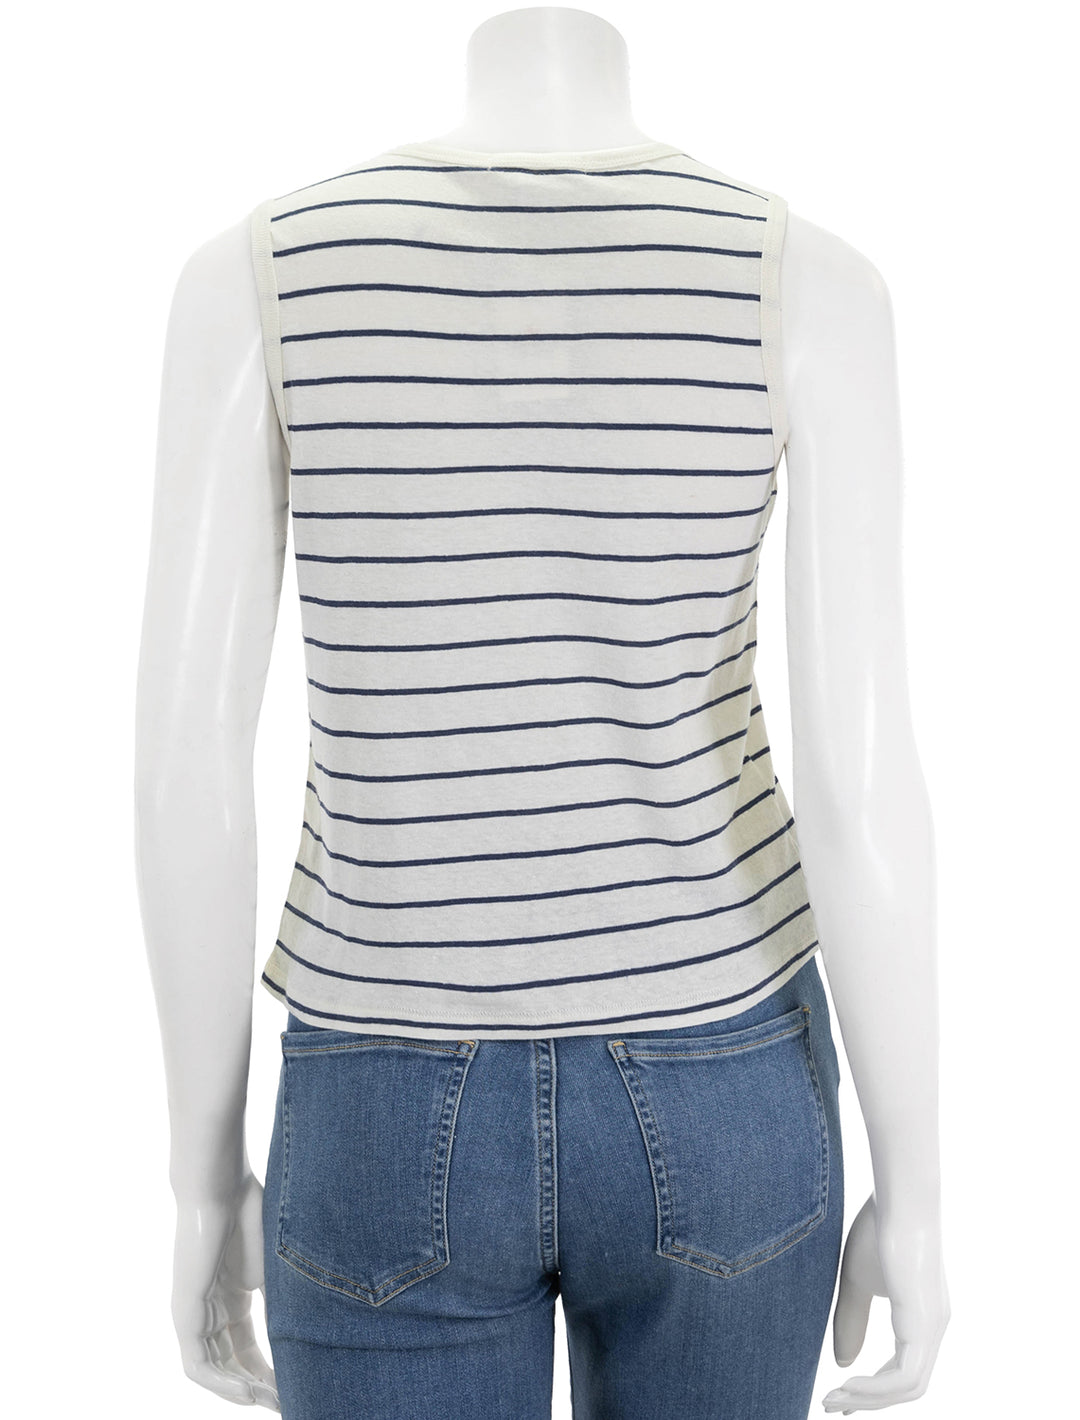 Back view of Marine Layer's hemp cotton muscle tee in white and black stripe.